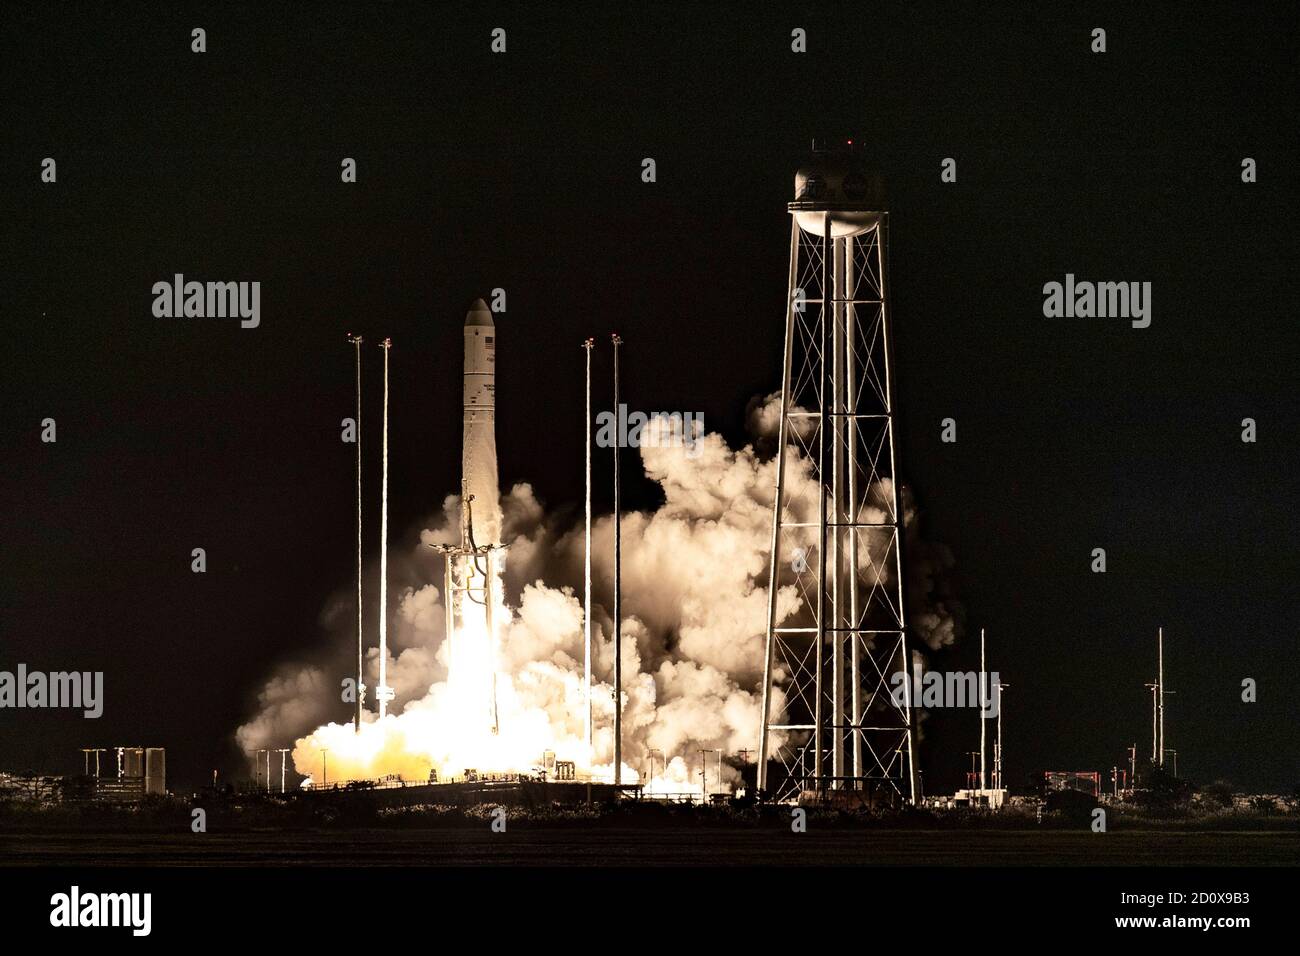 The Northrop Grumman Antares rocket, with Cygnus resupply spacecraft onboard, lifts off from the Mid-Atlantic Regional Spaceport at the NASA Wallops Flight Facility October 1, 2020 in Wallops, Virginia. The commercial cargo resupply mission is carrying 8,000 pounds of supplies and equipment to the International Space Station. Stock Photo